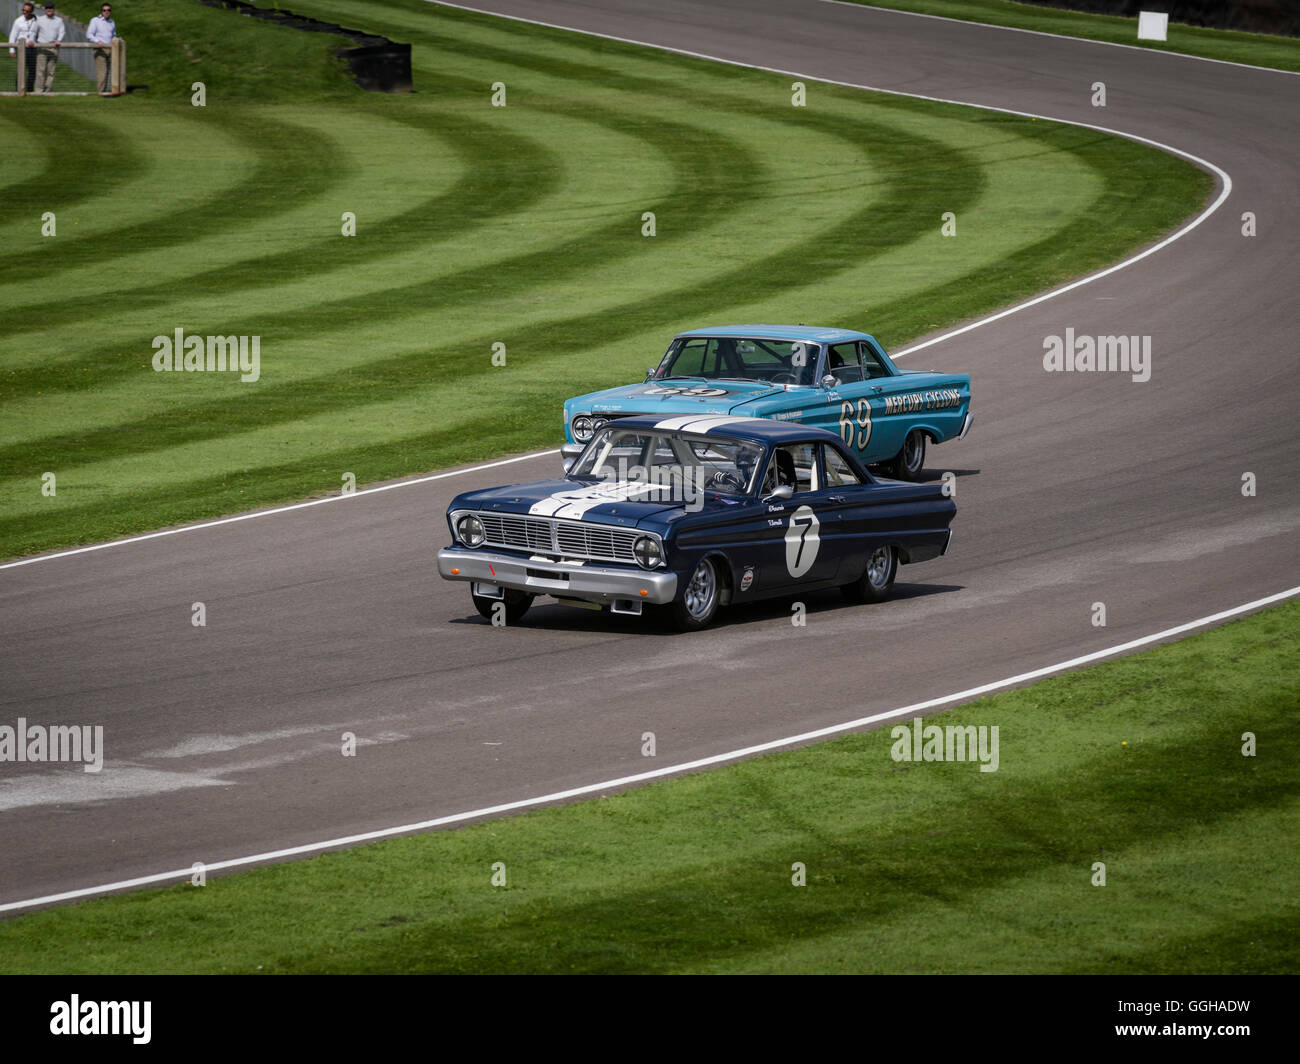 Ford Falcon Sprint, Shelby Cup, Goodwood 2014, Racing Sport, Classic Car, Goodwood, Chichester, Sussex, Inghilterra, grande B Foto Stock